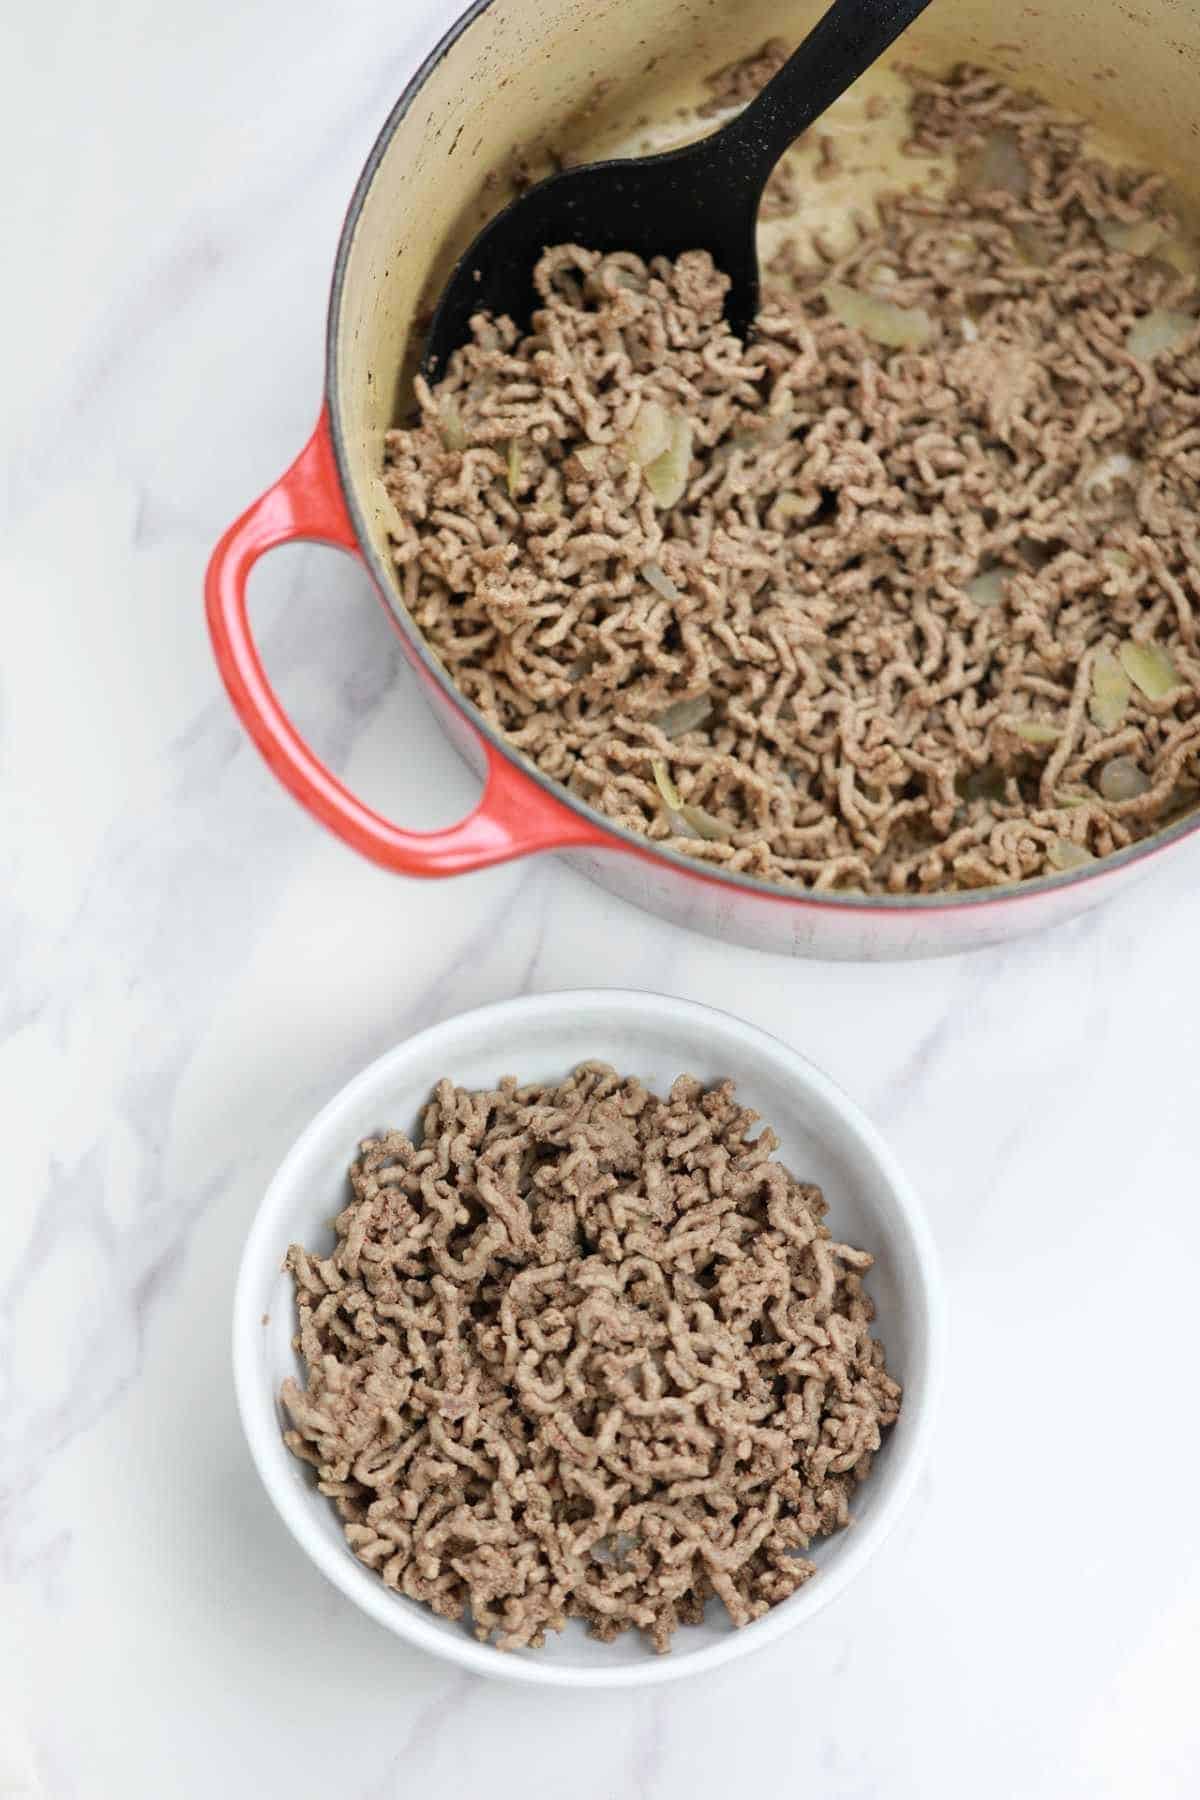 boiled ground beef in a red pot and white plate.